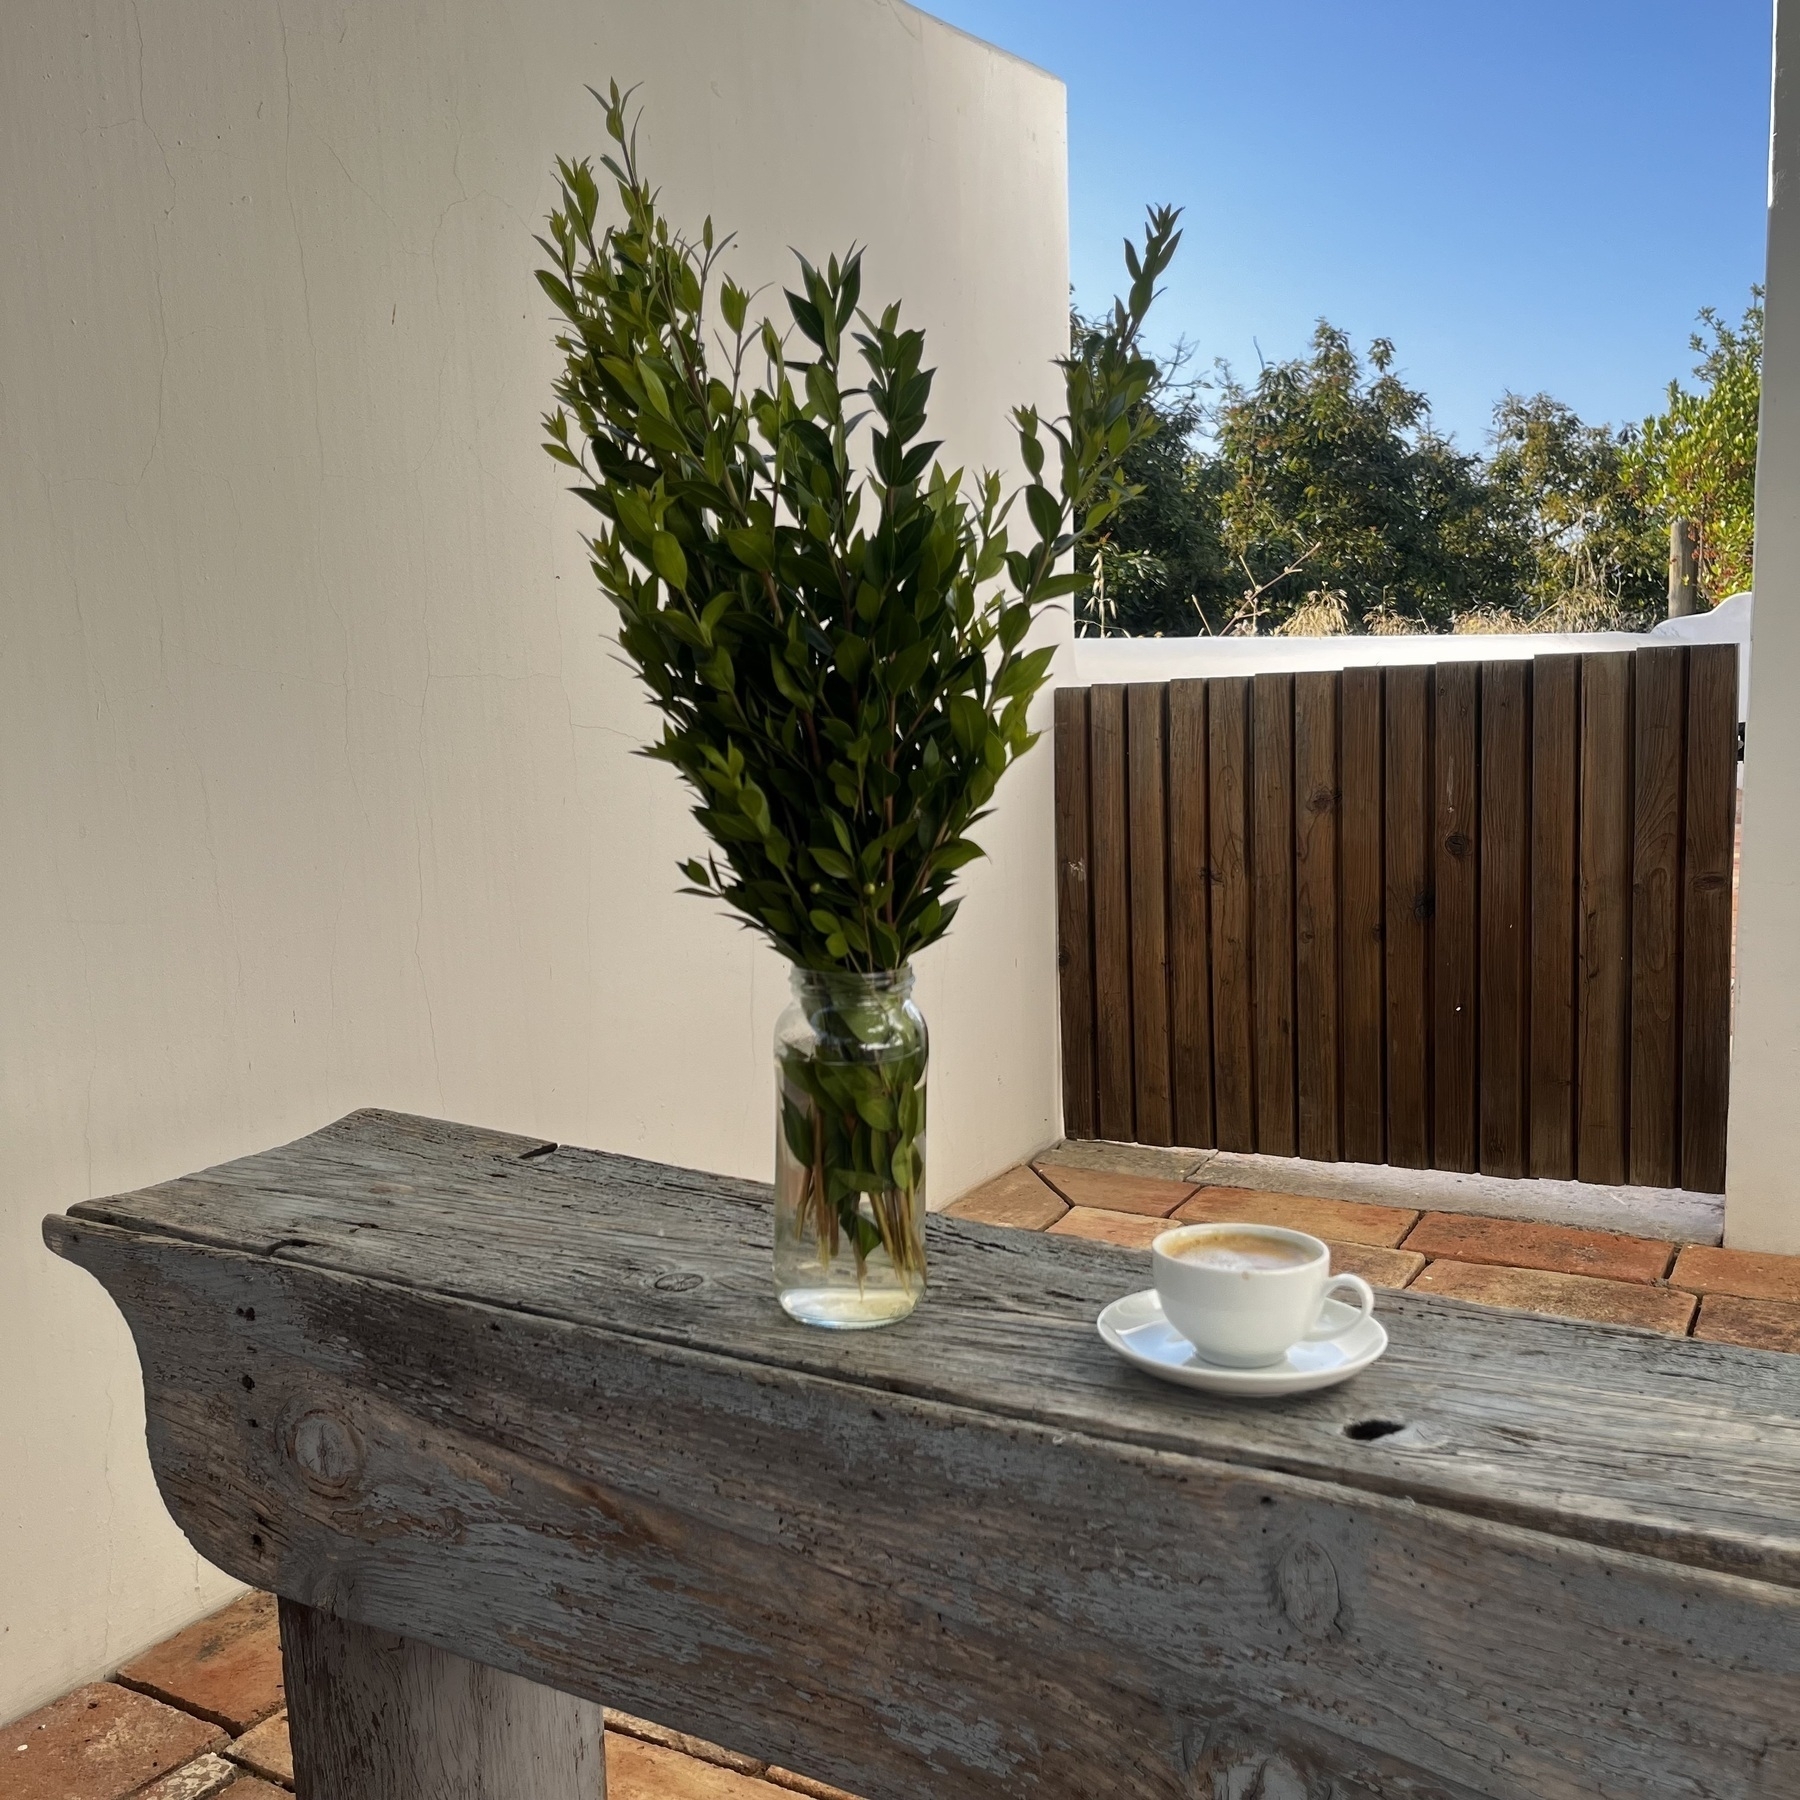 A old bench with a jar full of water and some green leafed branches in it. Beside is a small cup and saucer with coffee in it. Beyond is a low gate between white concrete walls looking out to grasses and bushes.